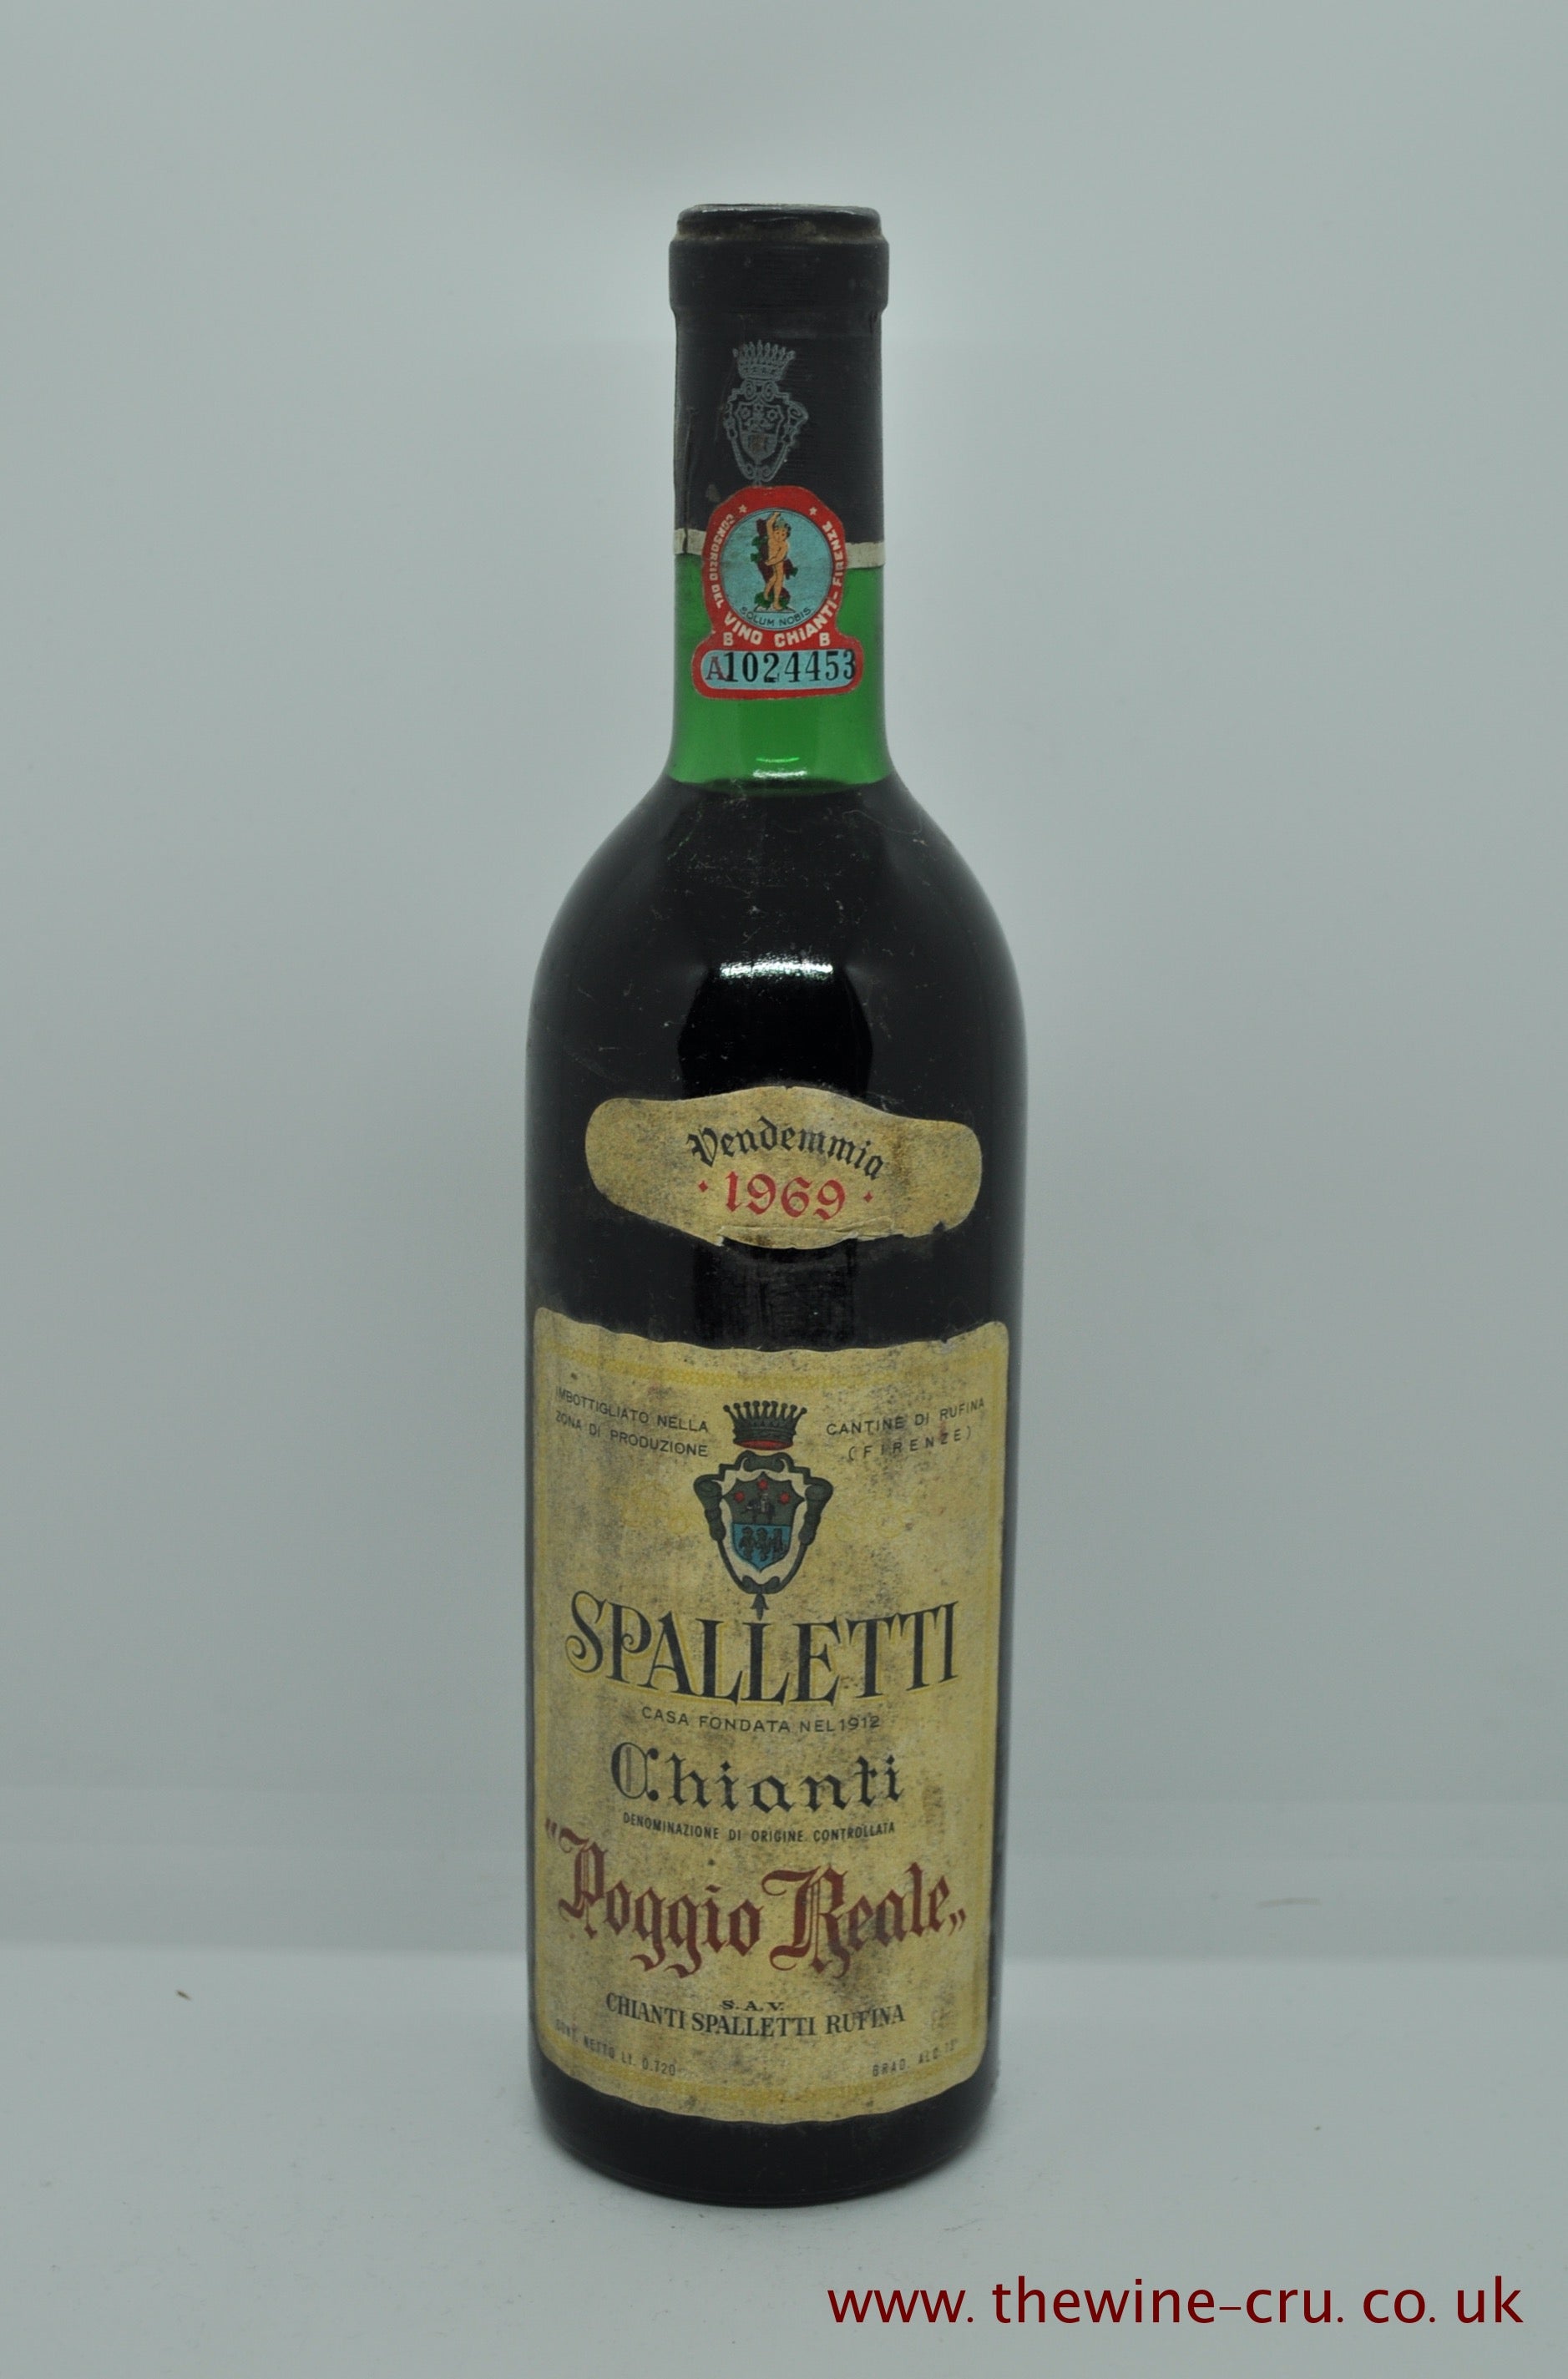 1969 vintage red wine. Chianti Poggio Reale Spalletti. Italy. The bottle is in good condition with the wine level very top shoulder. Immediate delivery. Free local delivery. Gift wrapping available.